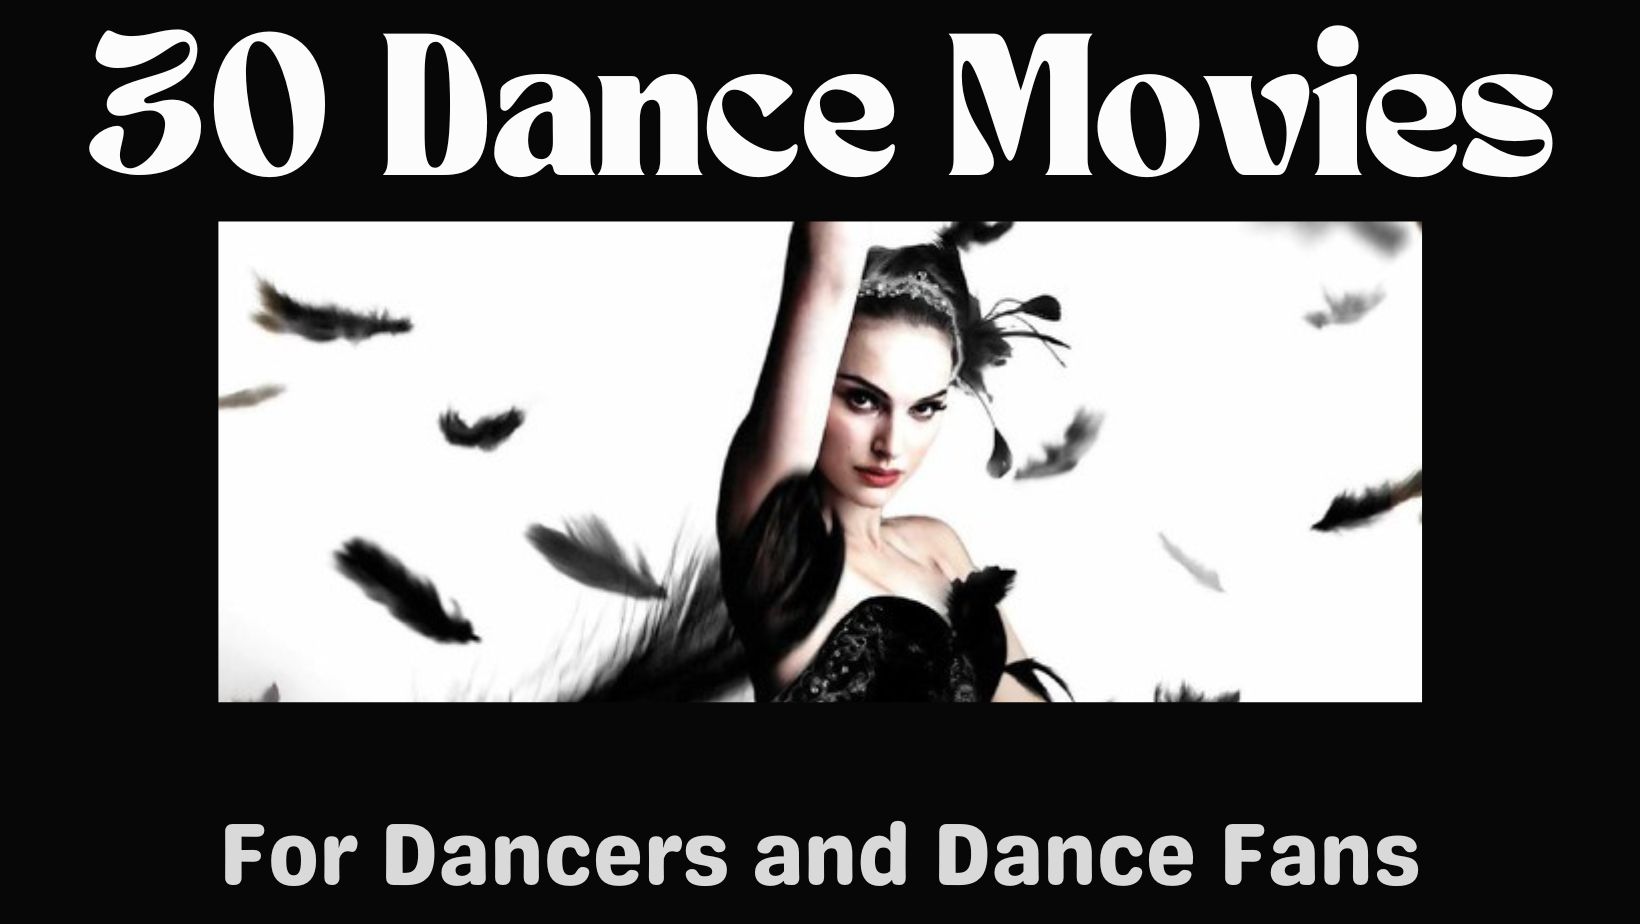 image in black and white, ballerina from black swan, text "30 dance movies for dancers and dance fans"